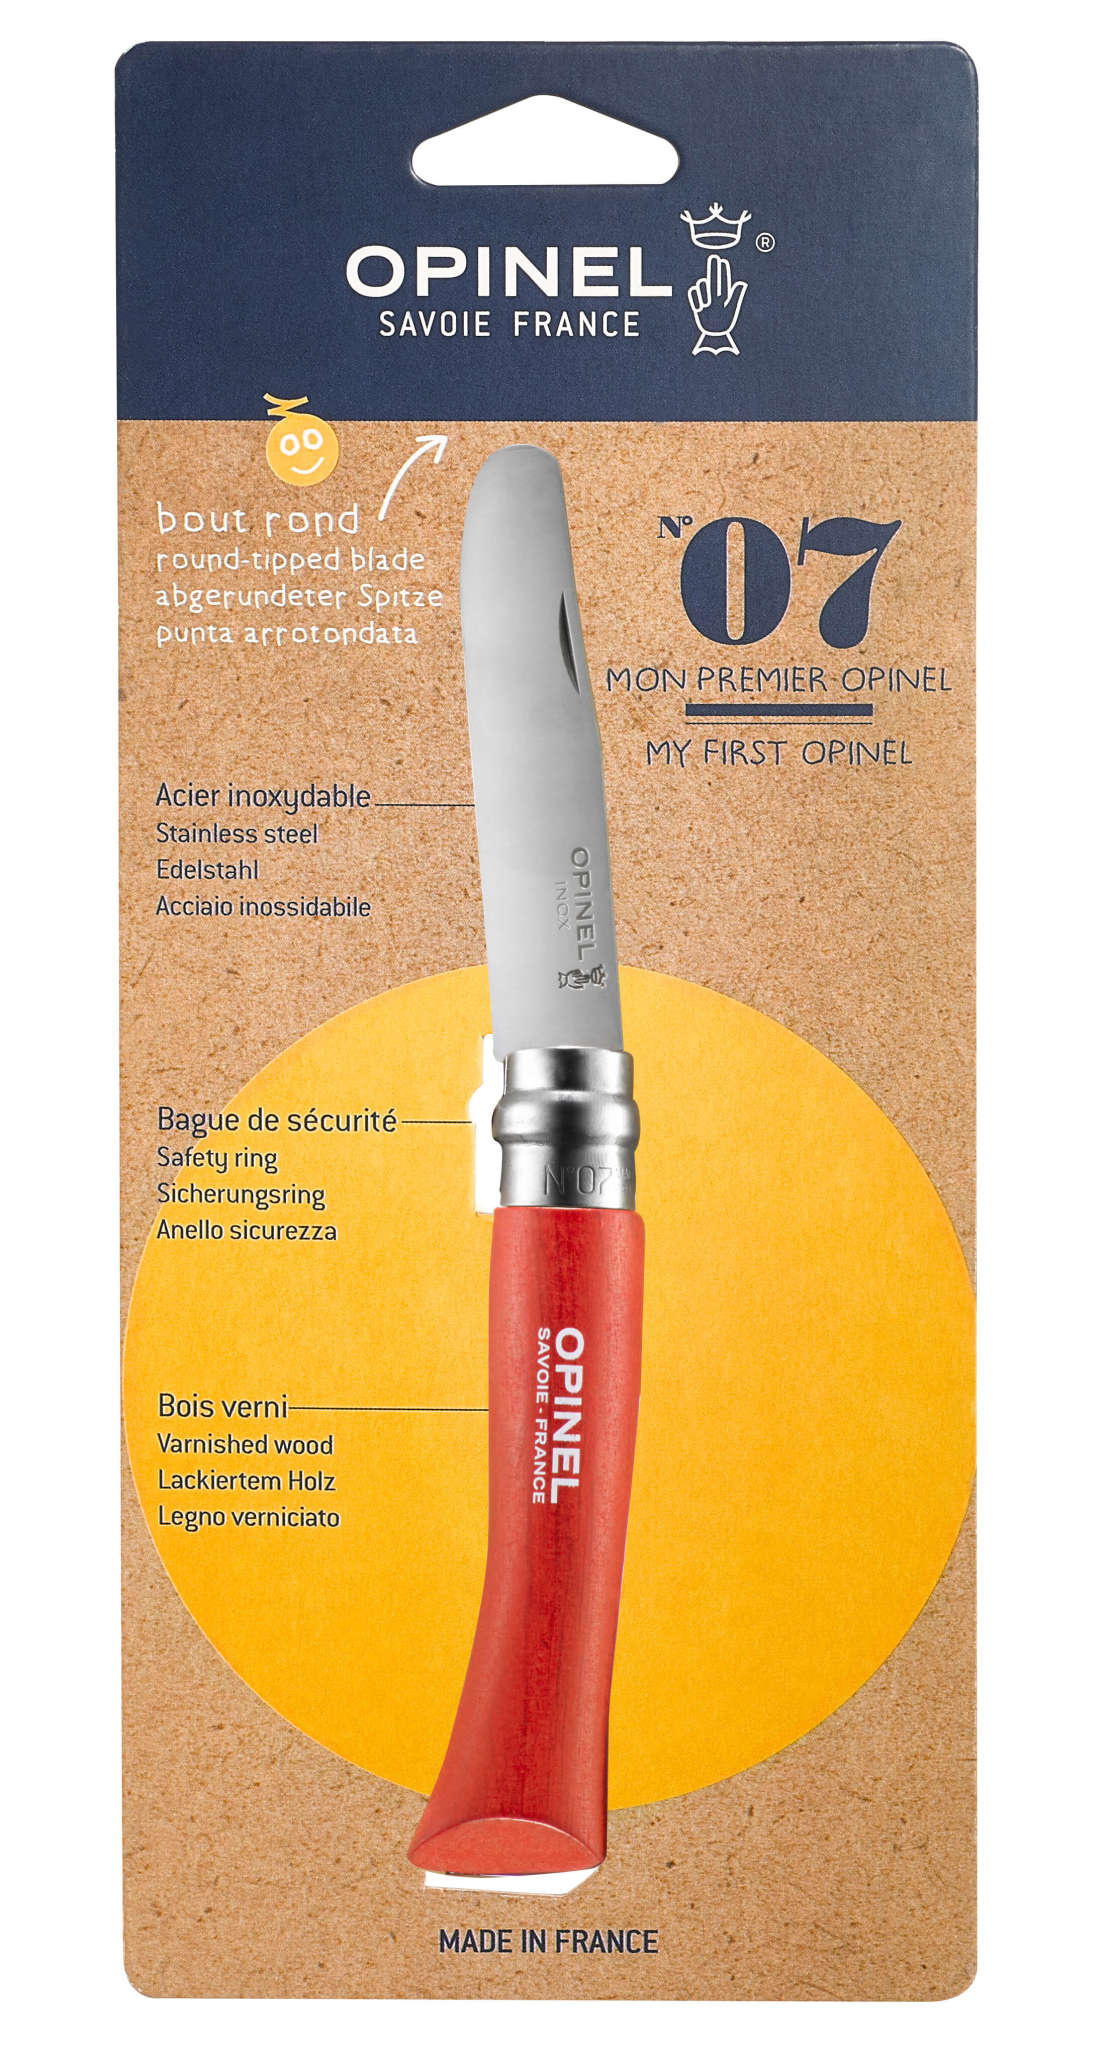 Couteau n°7 bout rond, lame inox, manche hêtre naturel Opinel